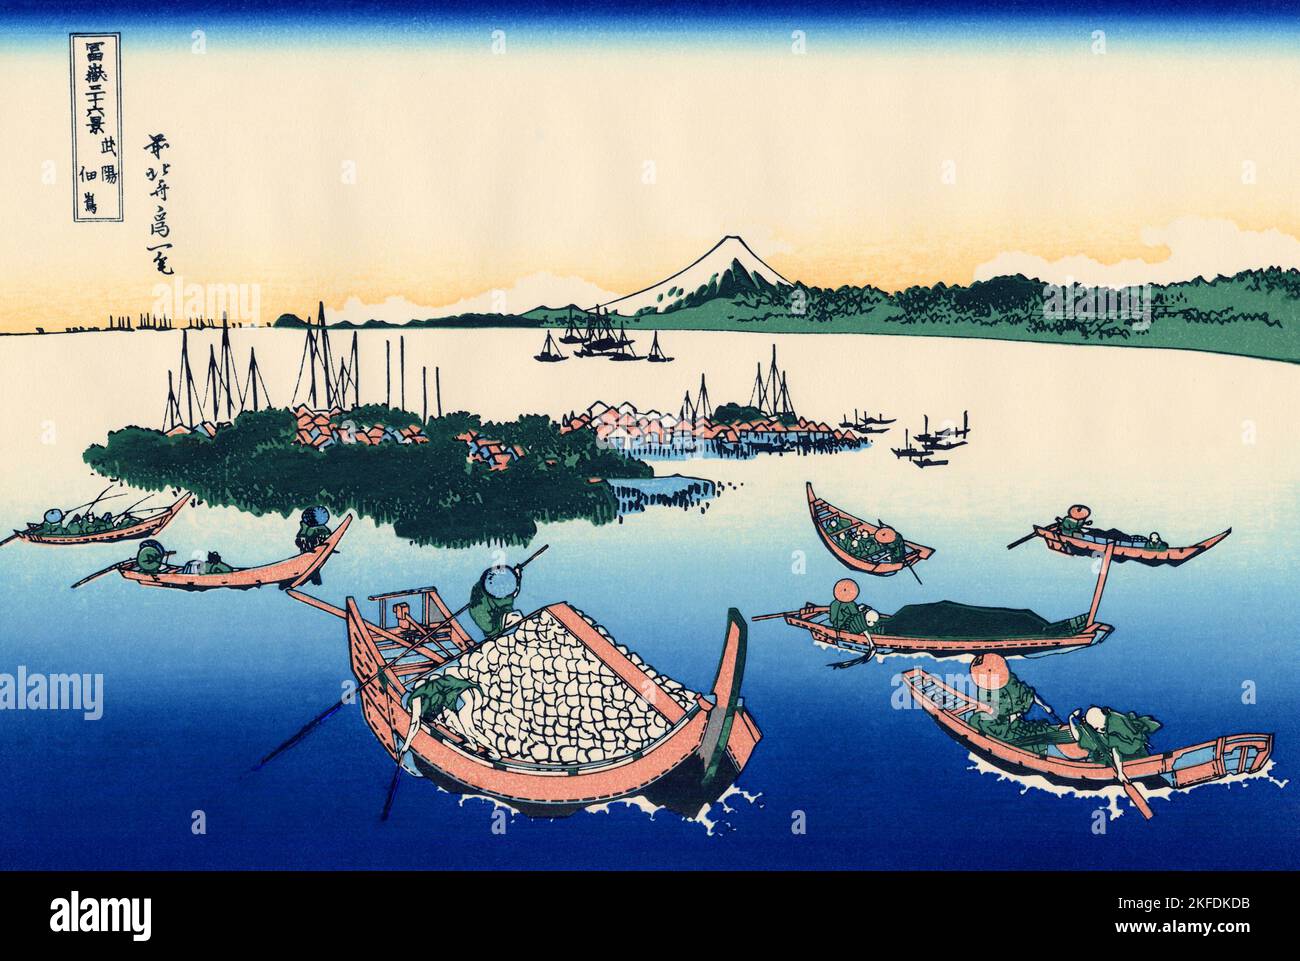 Japan: ‘Tsukada Island in the Musashi Province’. Ukiyo-e woodblock print from the series ‘Thirty-six Views of Mount Fuji’ by Katsushika Hokusai (31 October 1760 - 10 May 1849), c. 1830.  ‘36 Views of Mount Fuji’ is an ‘ukiyo-e’ series of large woodblock prints by the artist Katsushika Hokusai. The series depicts Mount Fuji in differing seasons and weather conditions from a variety of places and distances. It actually consists of 46 prints created between 1826 and 1833. The first 36 were included in the original publication and, due to their popularity, 10 more were added afterwards. Stock Photo